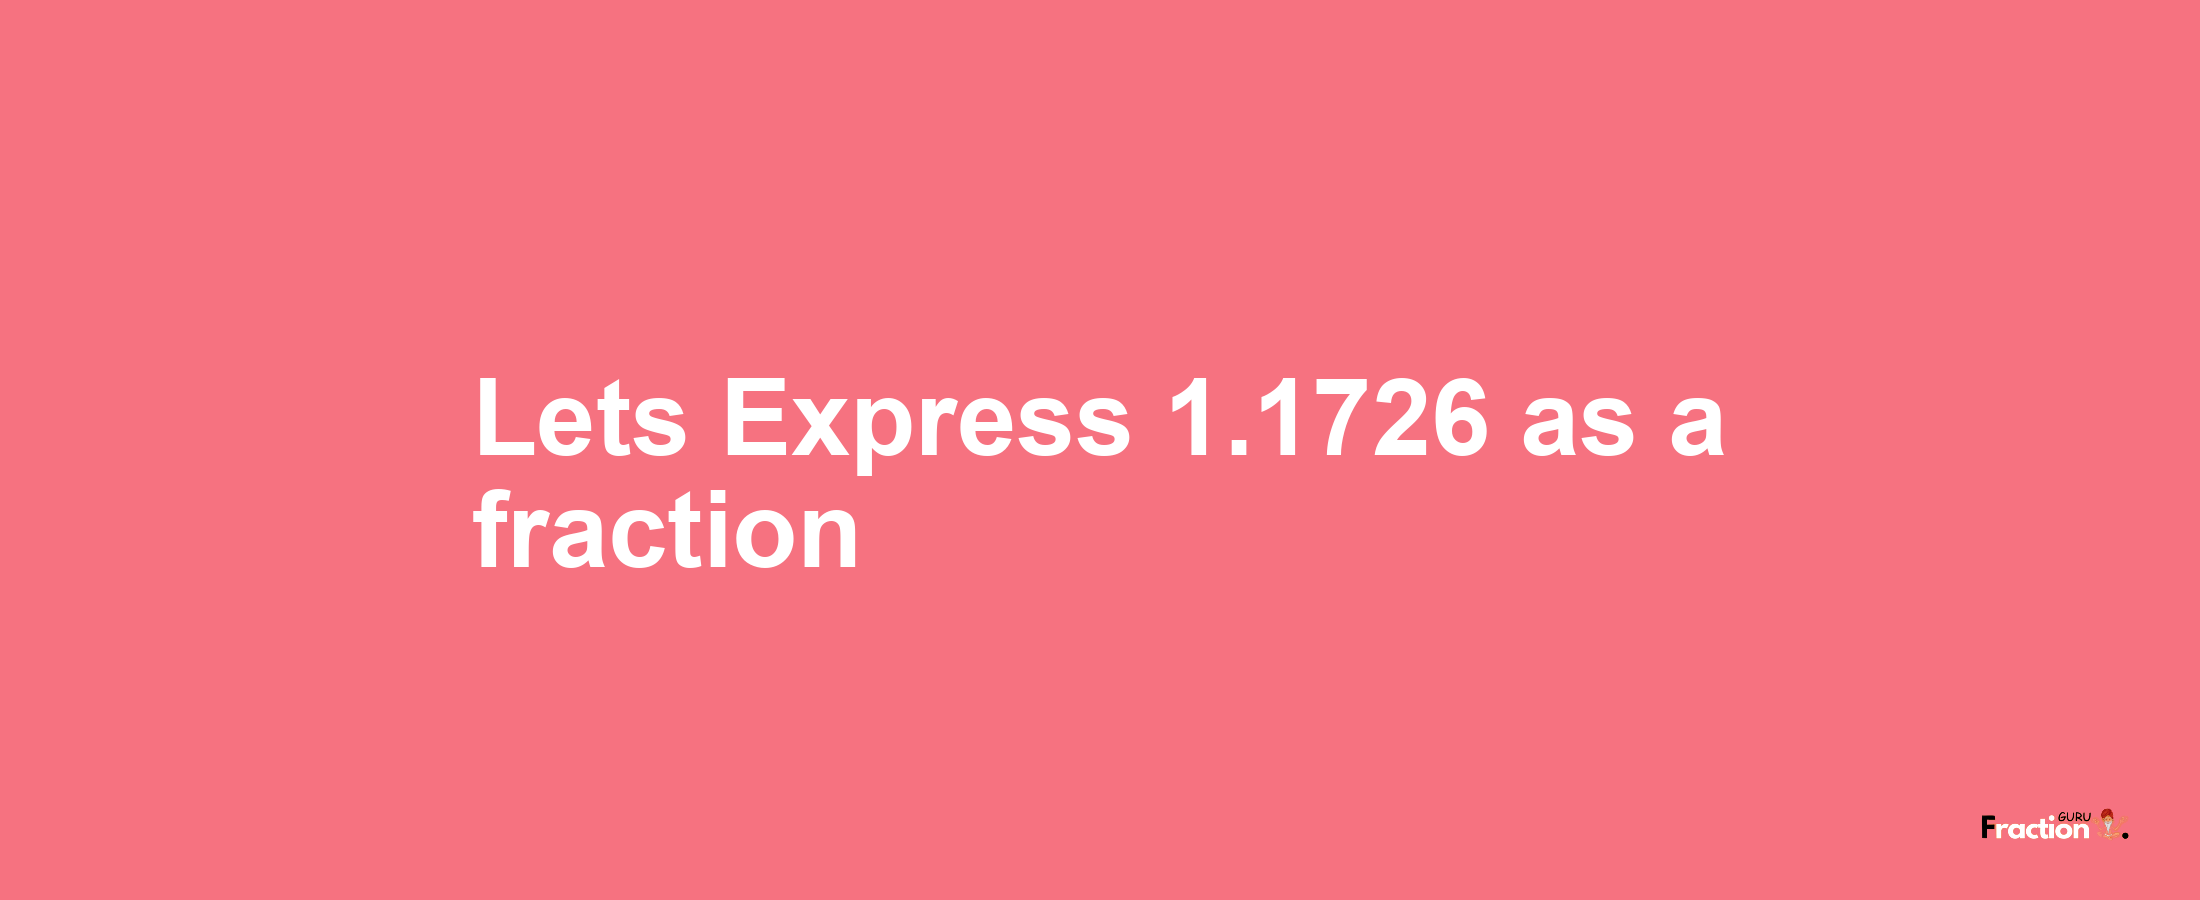 Lets Express 1.1726 as afraction